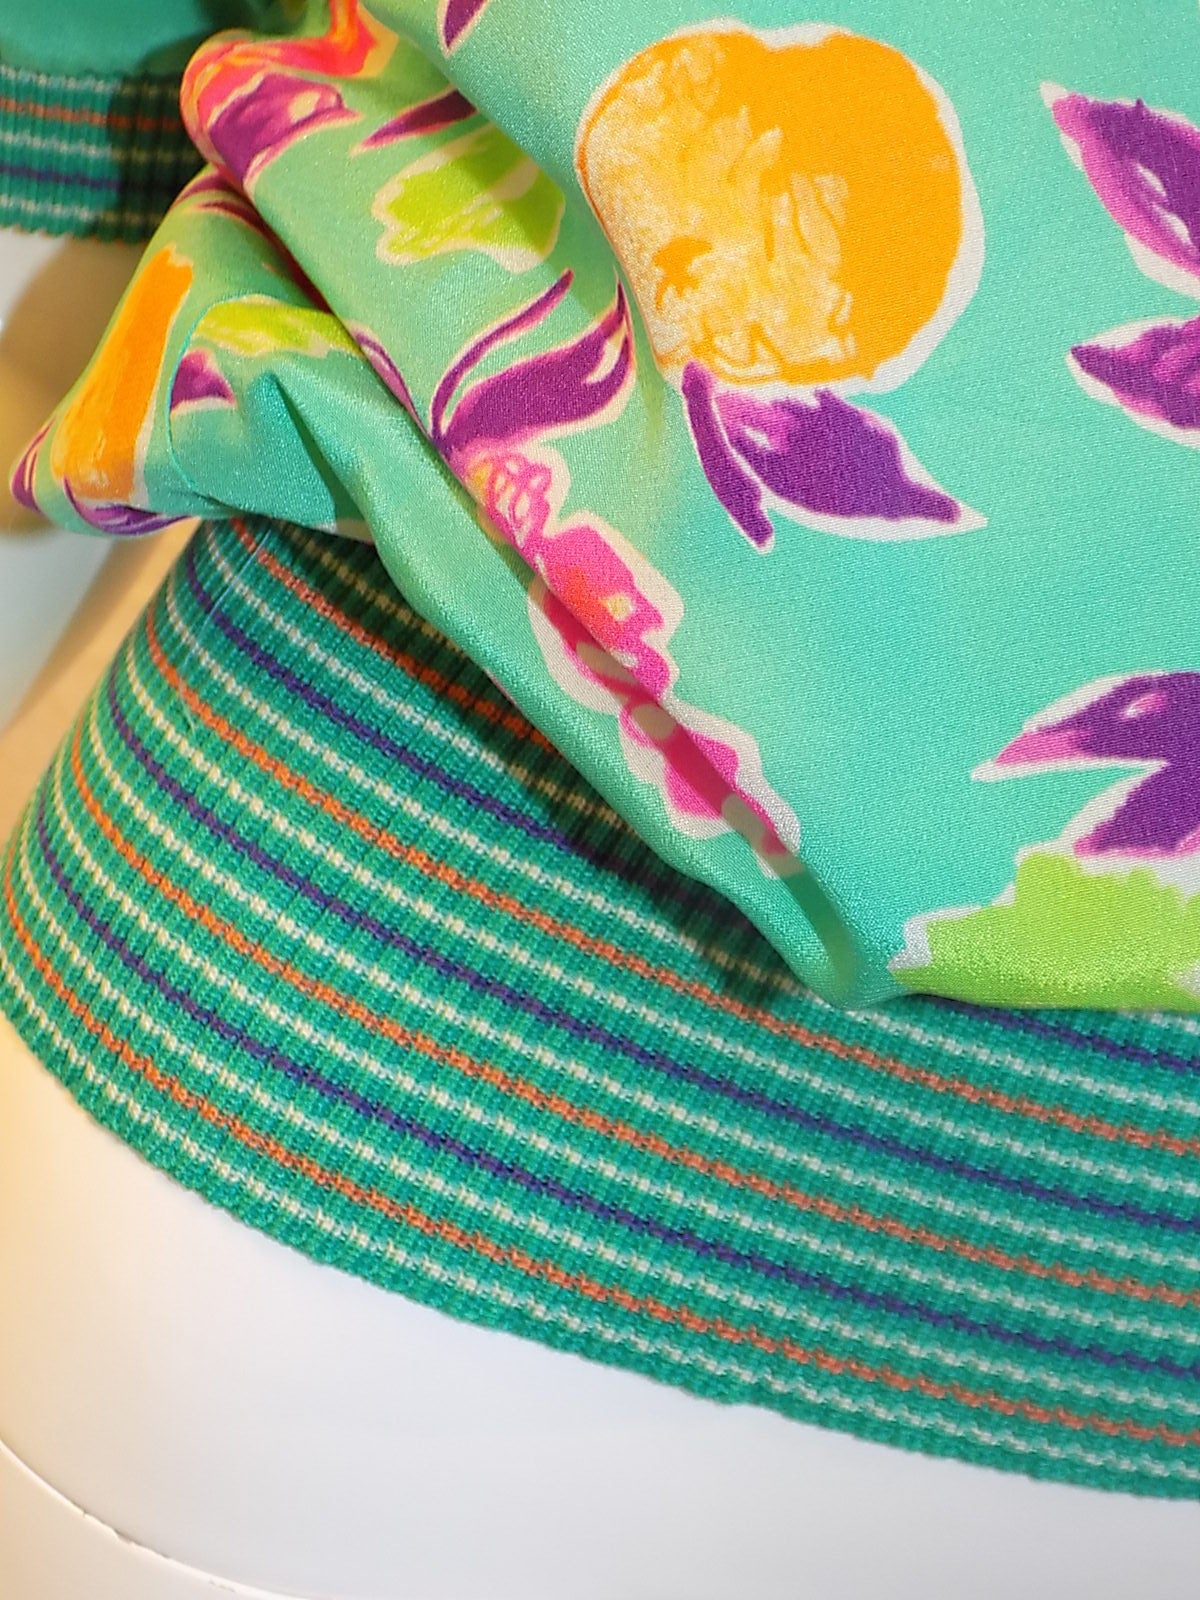 Emanuel Ungaro aqua  green multicolor floral bouquet silk twill short-sleeve top.
 Lightweight silk twill.  Boatneckline. Waist and sleeves  trimmed in matching striped rib-knit.    Button and loop closure at back. 
    Made in Italy.Excellent